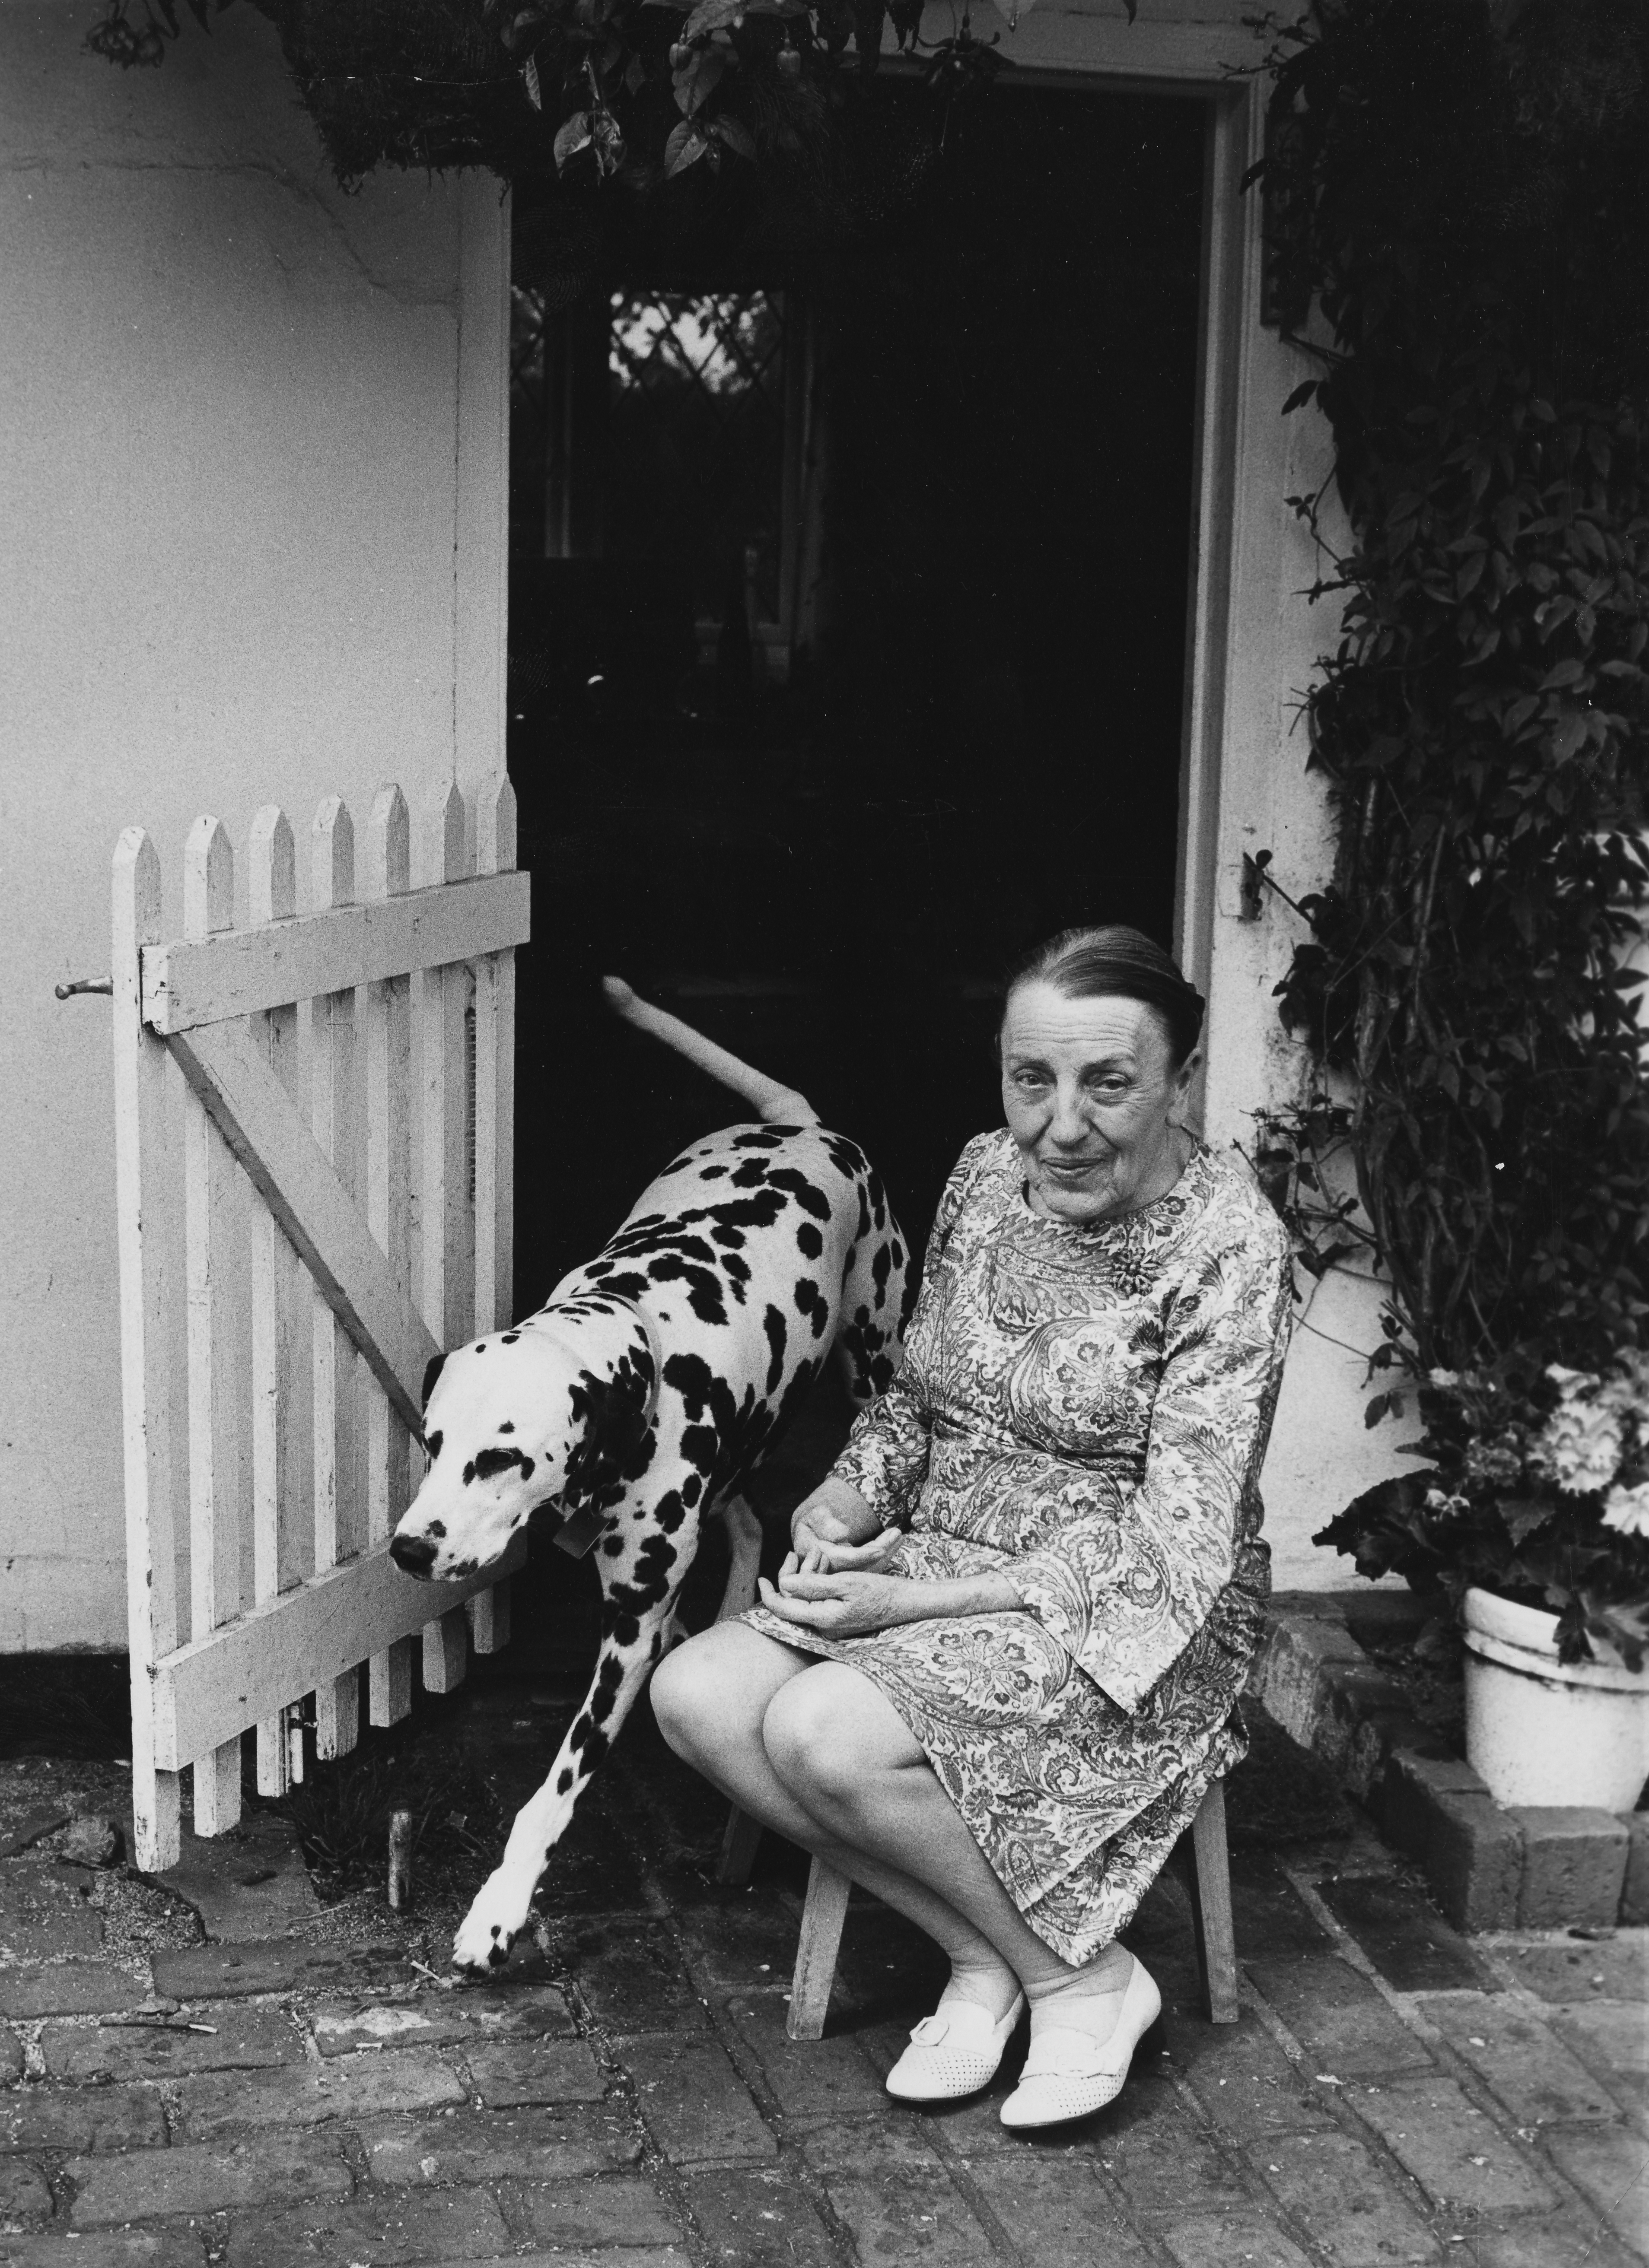 Dodie Smith, author of '101 Dalmatians', sitting outside her cottage with a pet Dalmatian in Essex, July 23, 1973 (Getty Images)